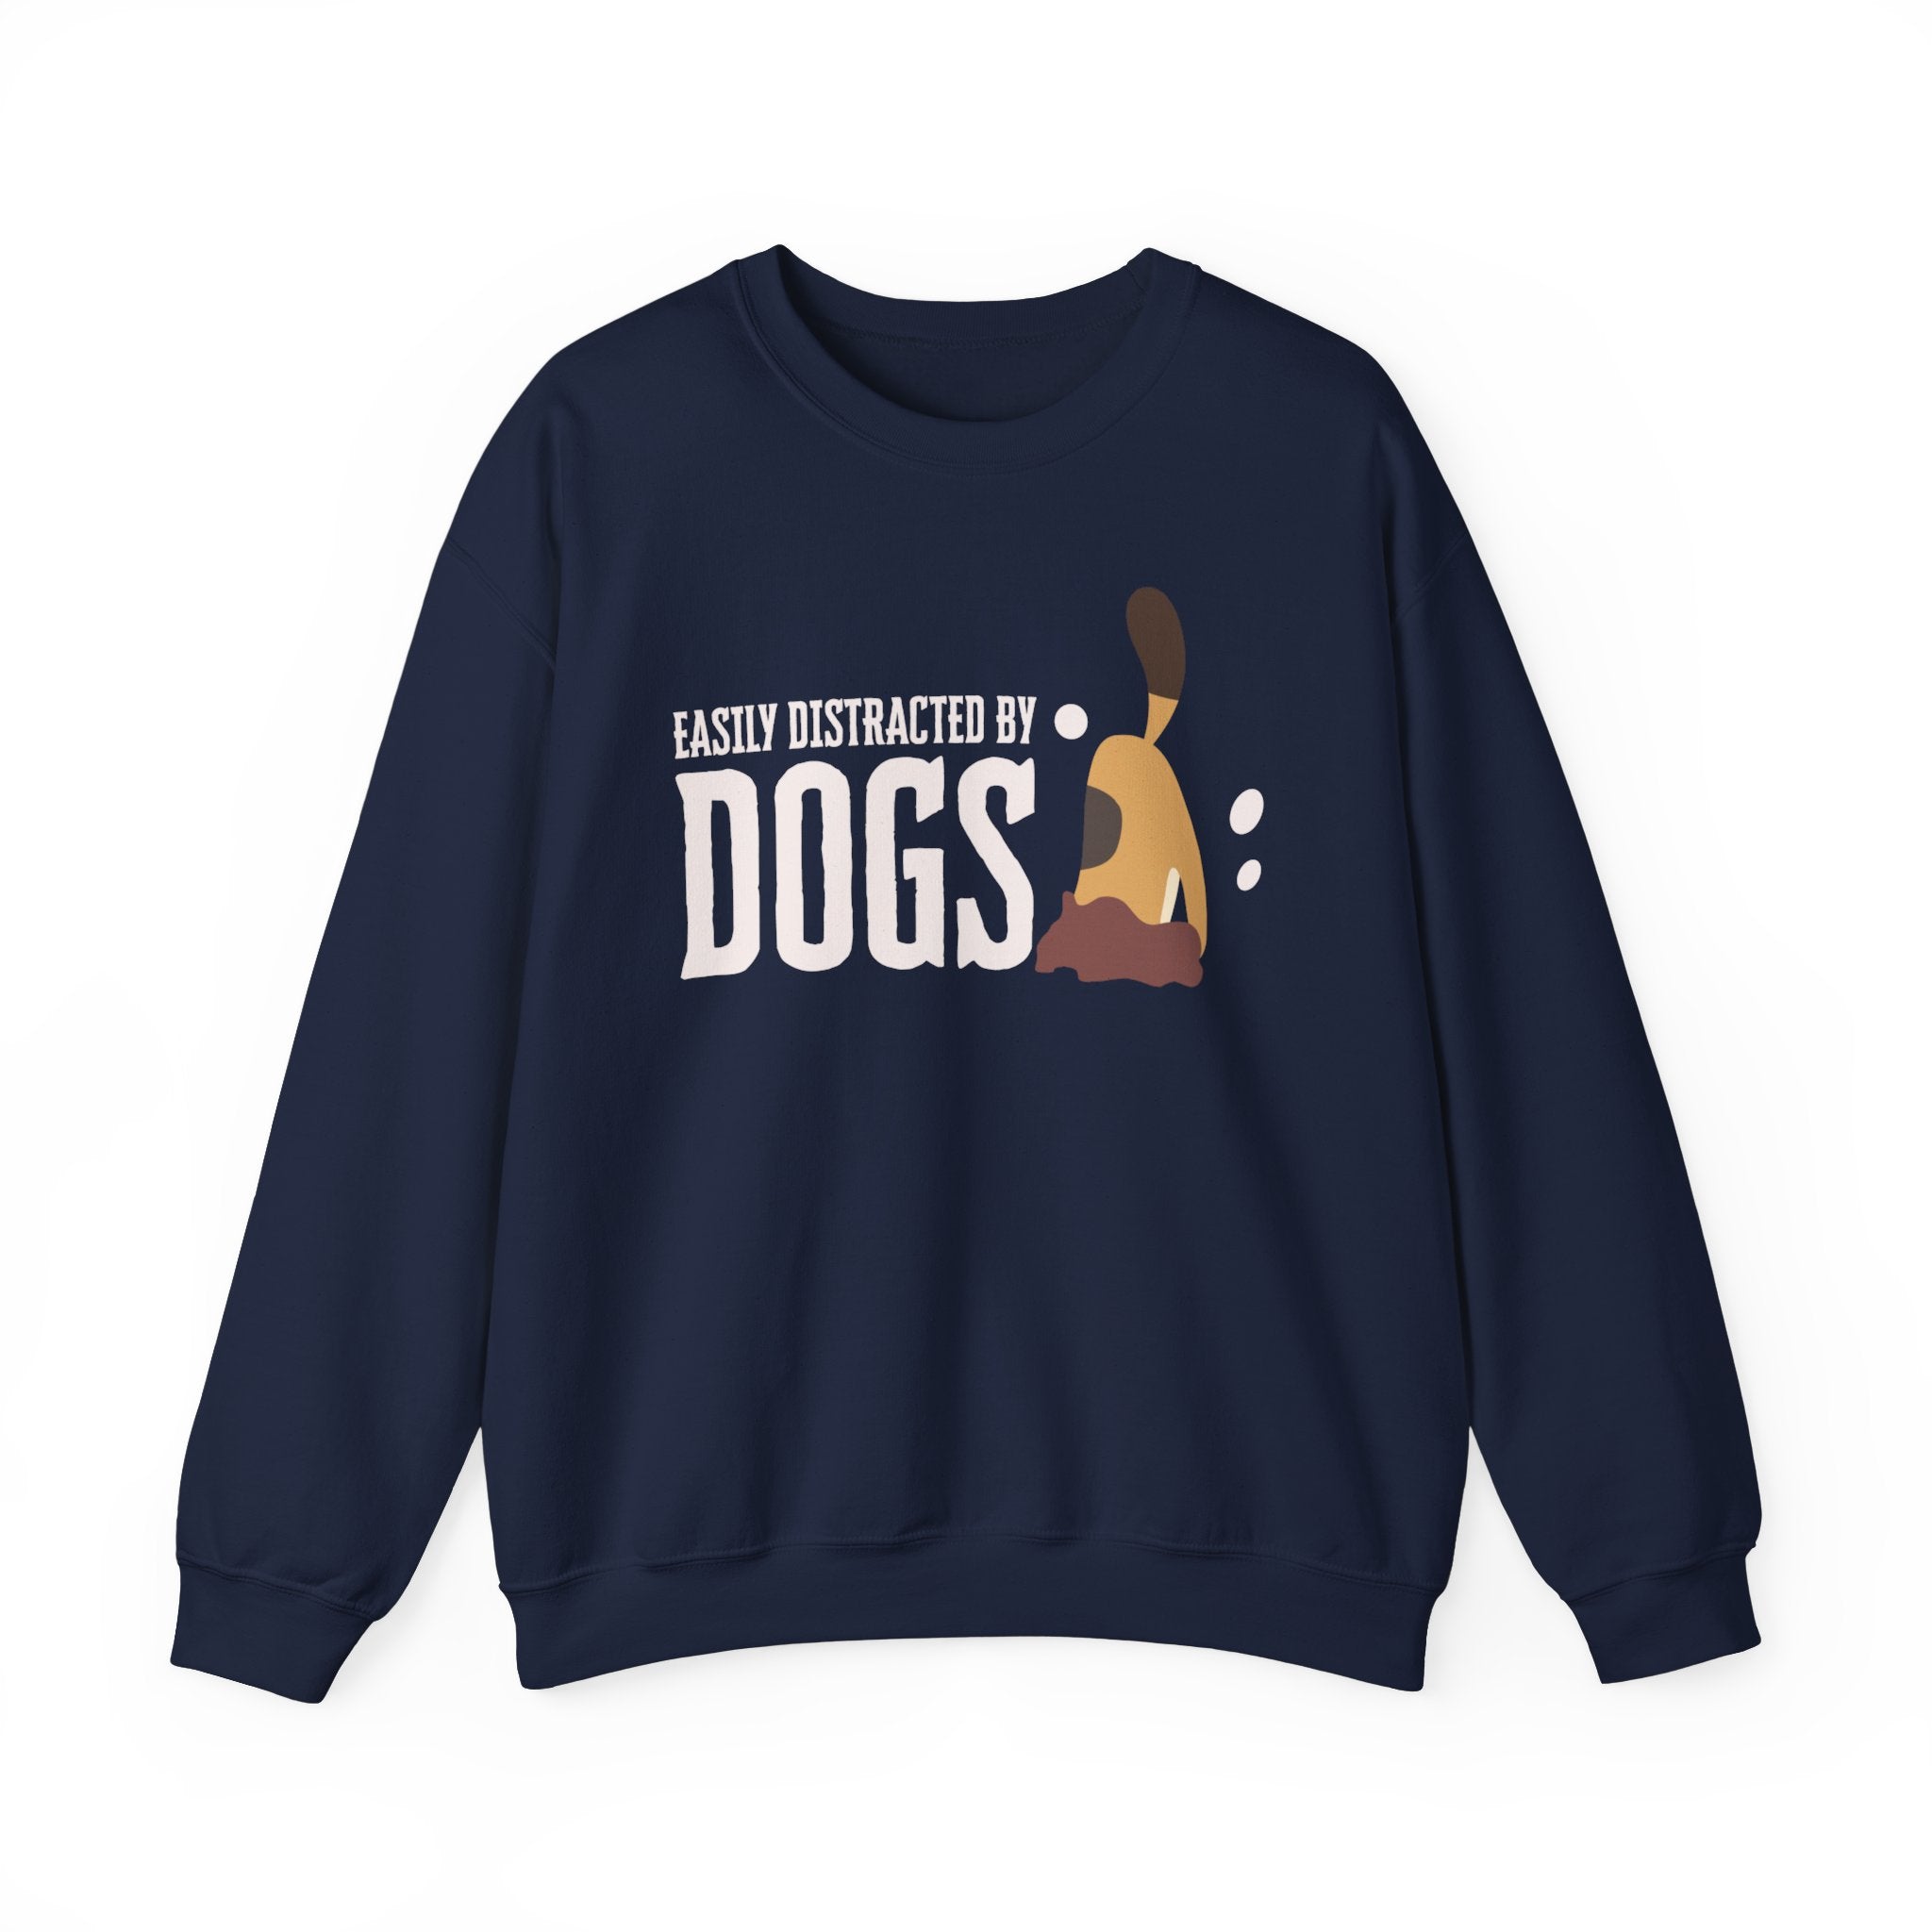 A navy unisex ‘Dogs Pure Love, Dog Dig’ sweatshirt features a dog digging with the slogan ‘Easily Distracted by Dogs,’ against a white backdrop.